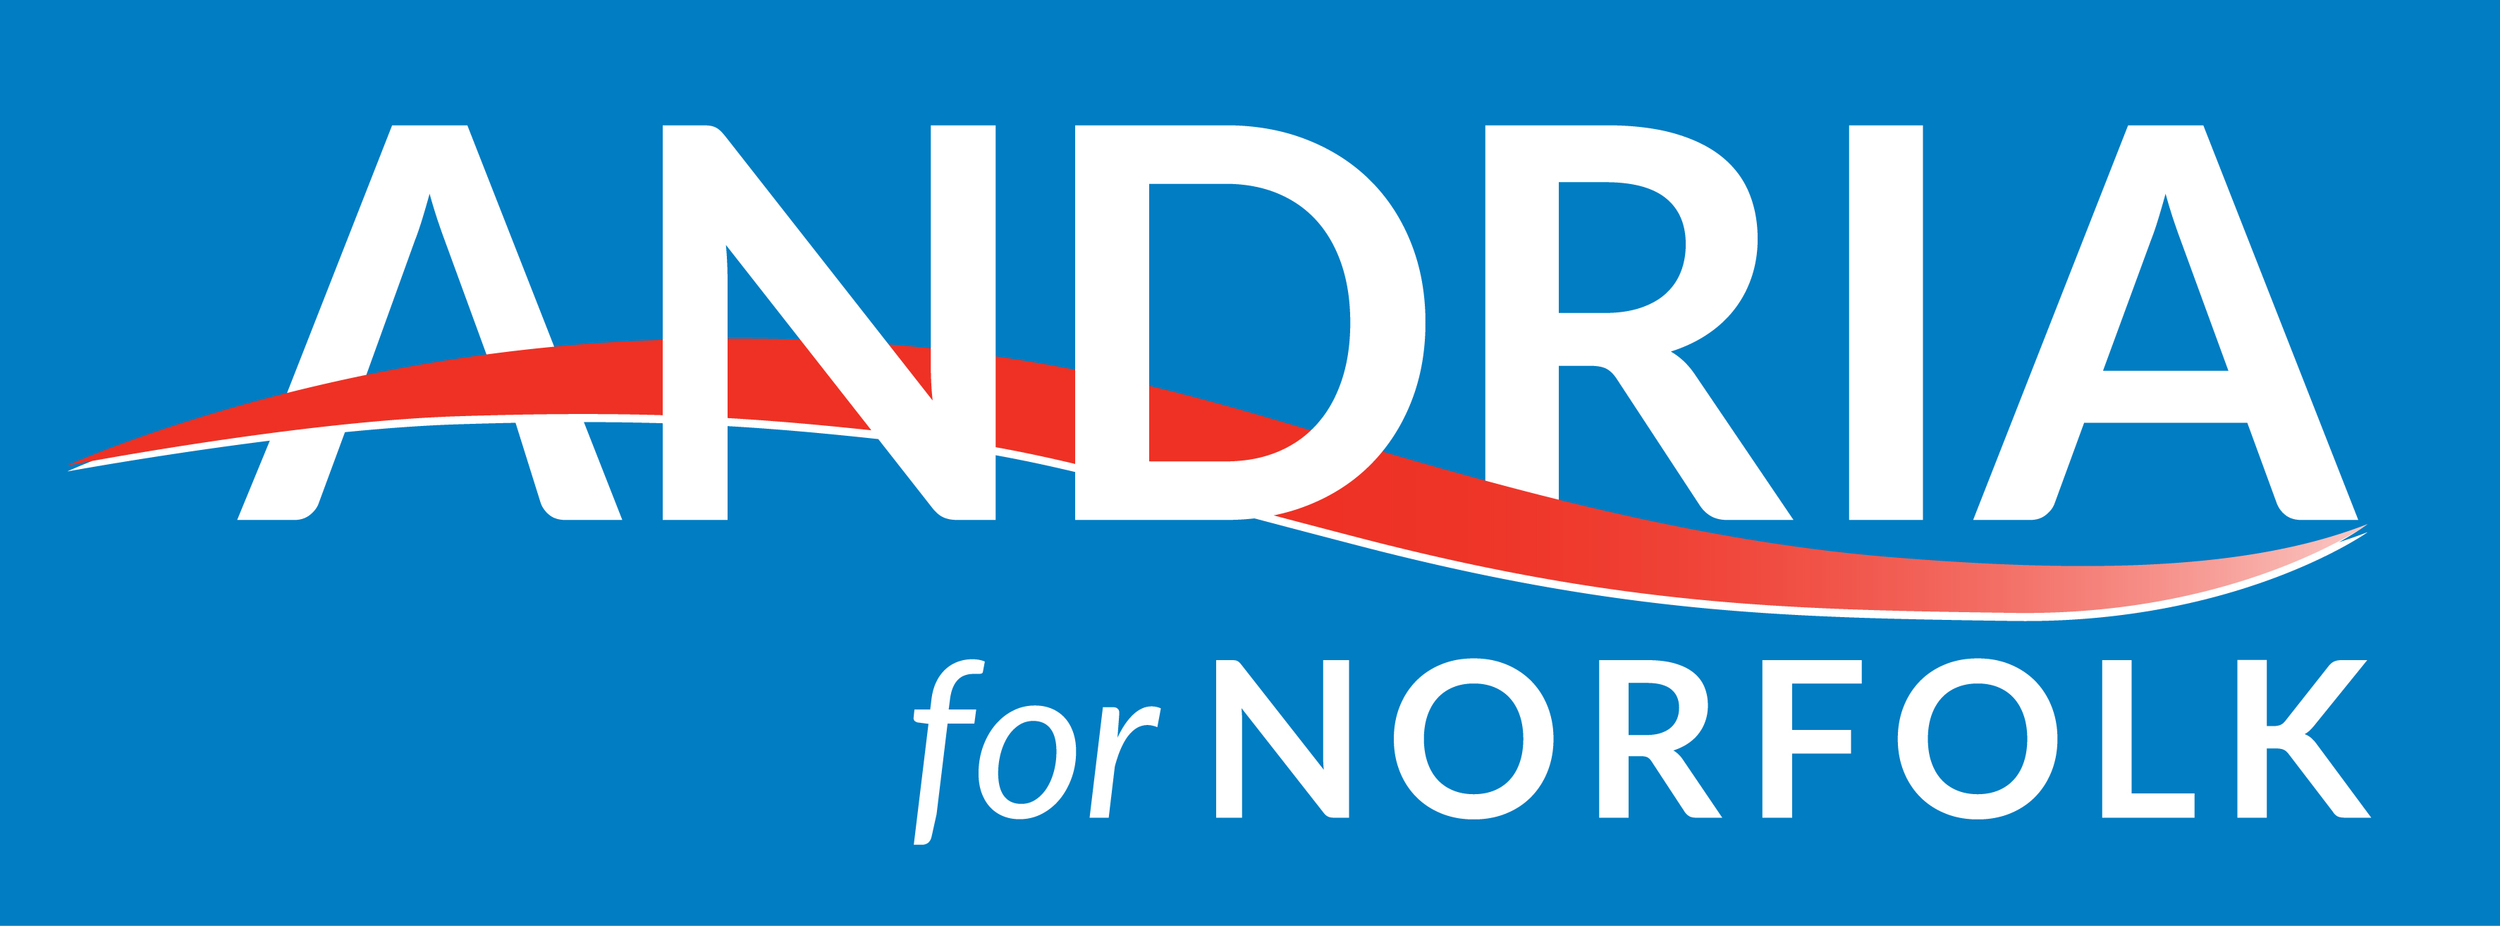 Official Campaign Bumpersticker